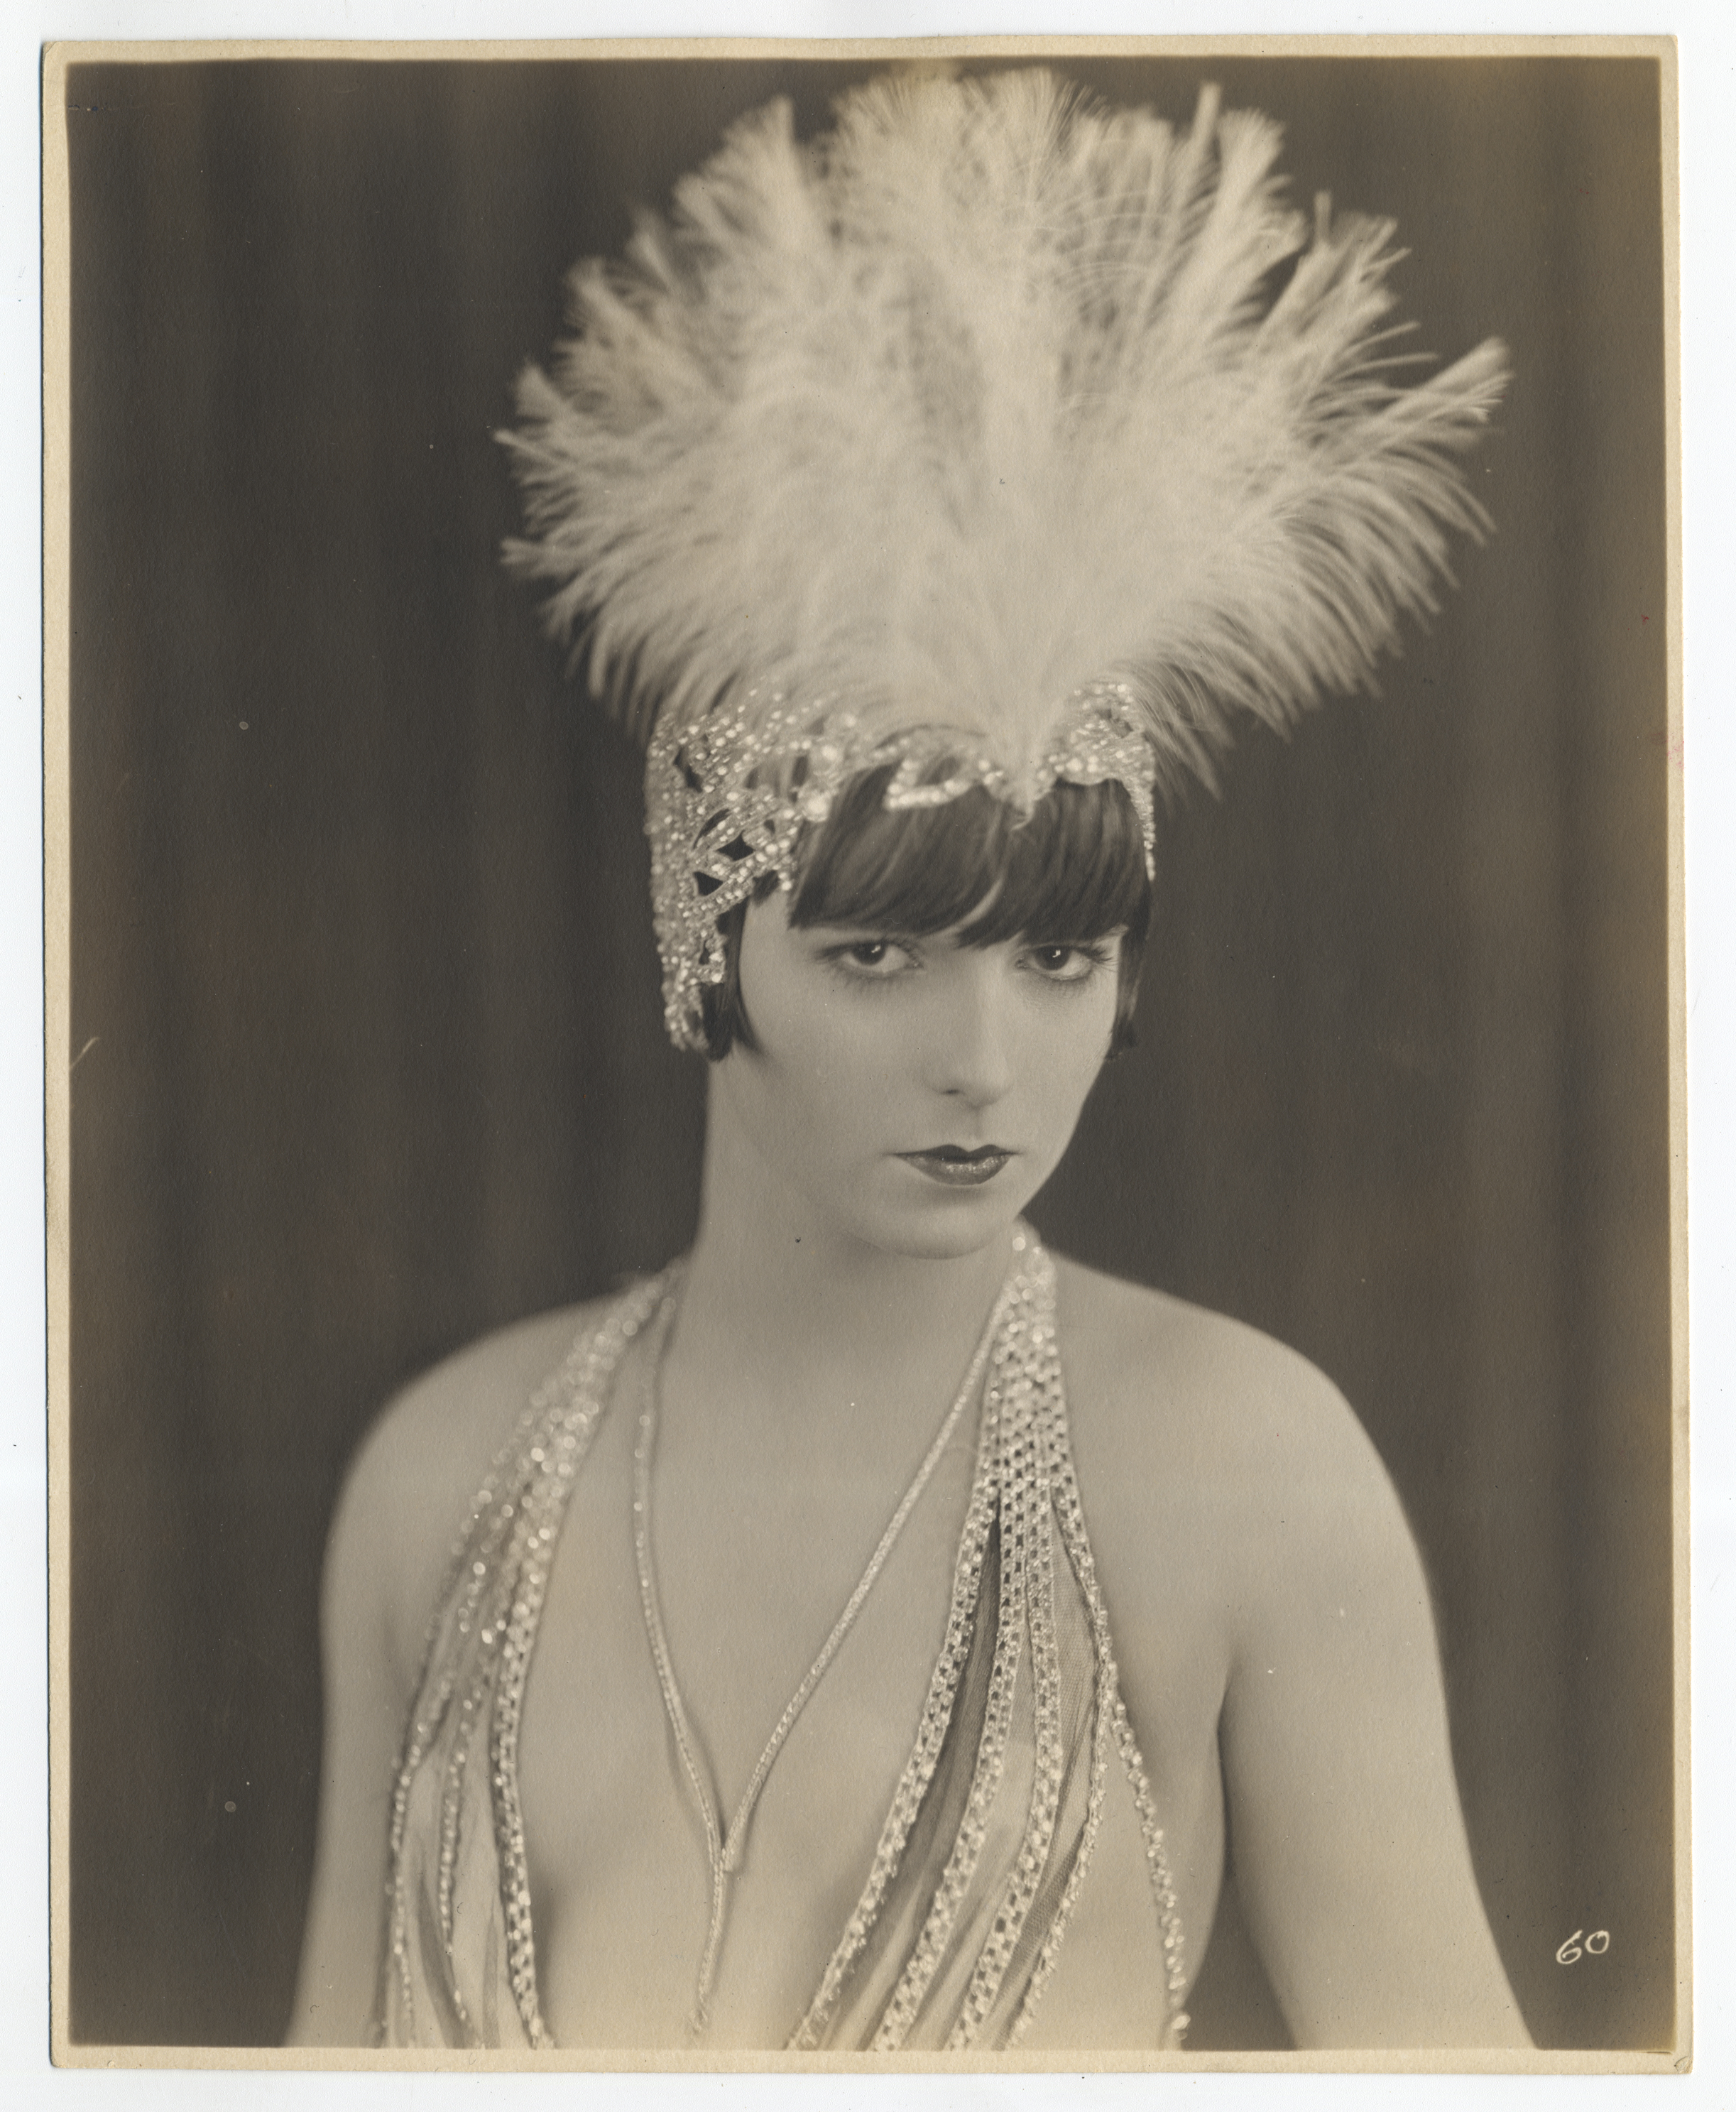 Photo of Louise Brooks in medium shot, wearing a white feathered headdress, looking at camera